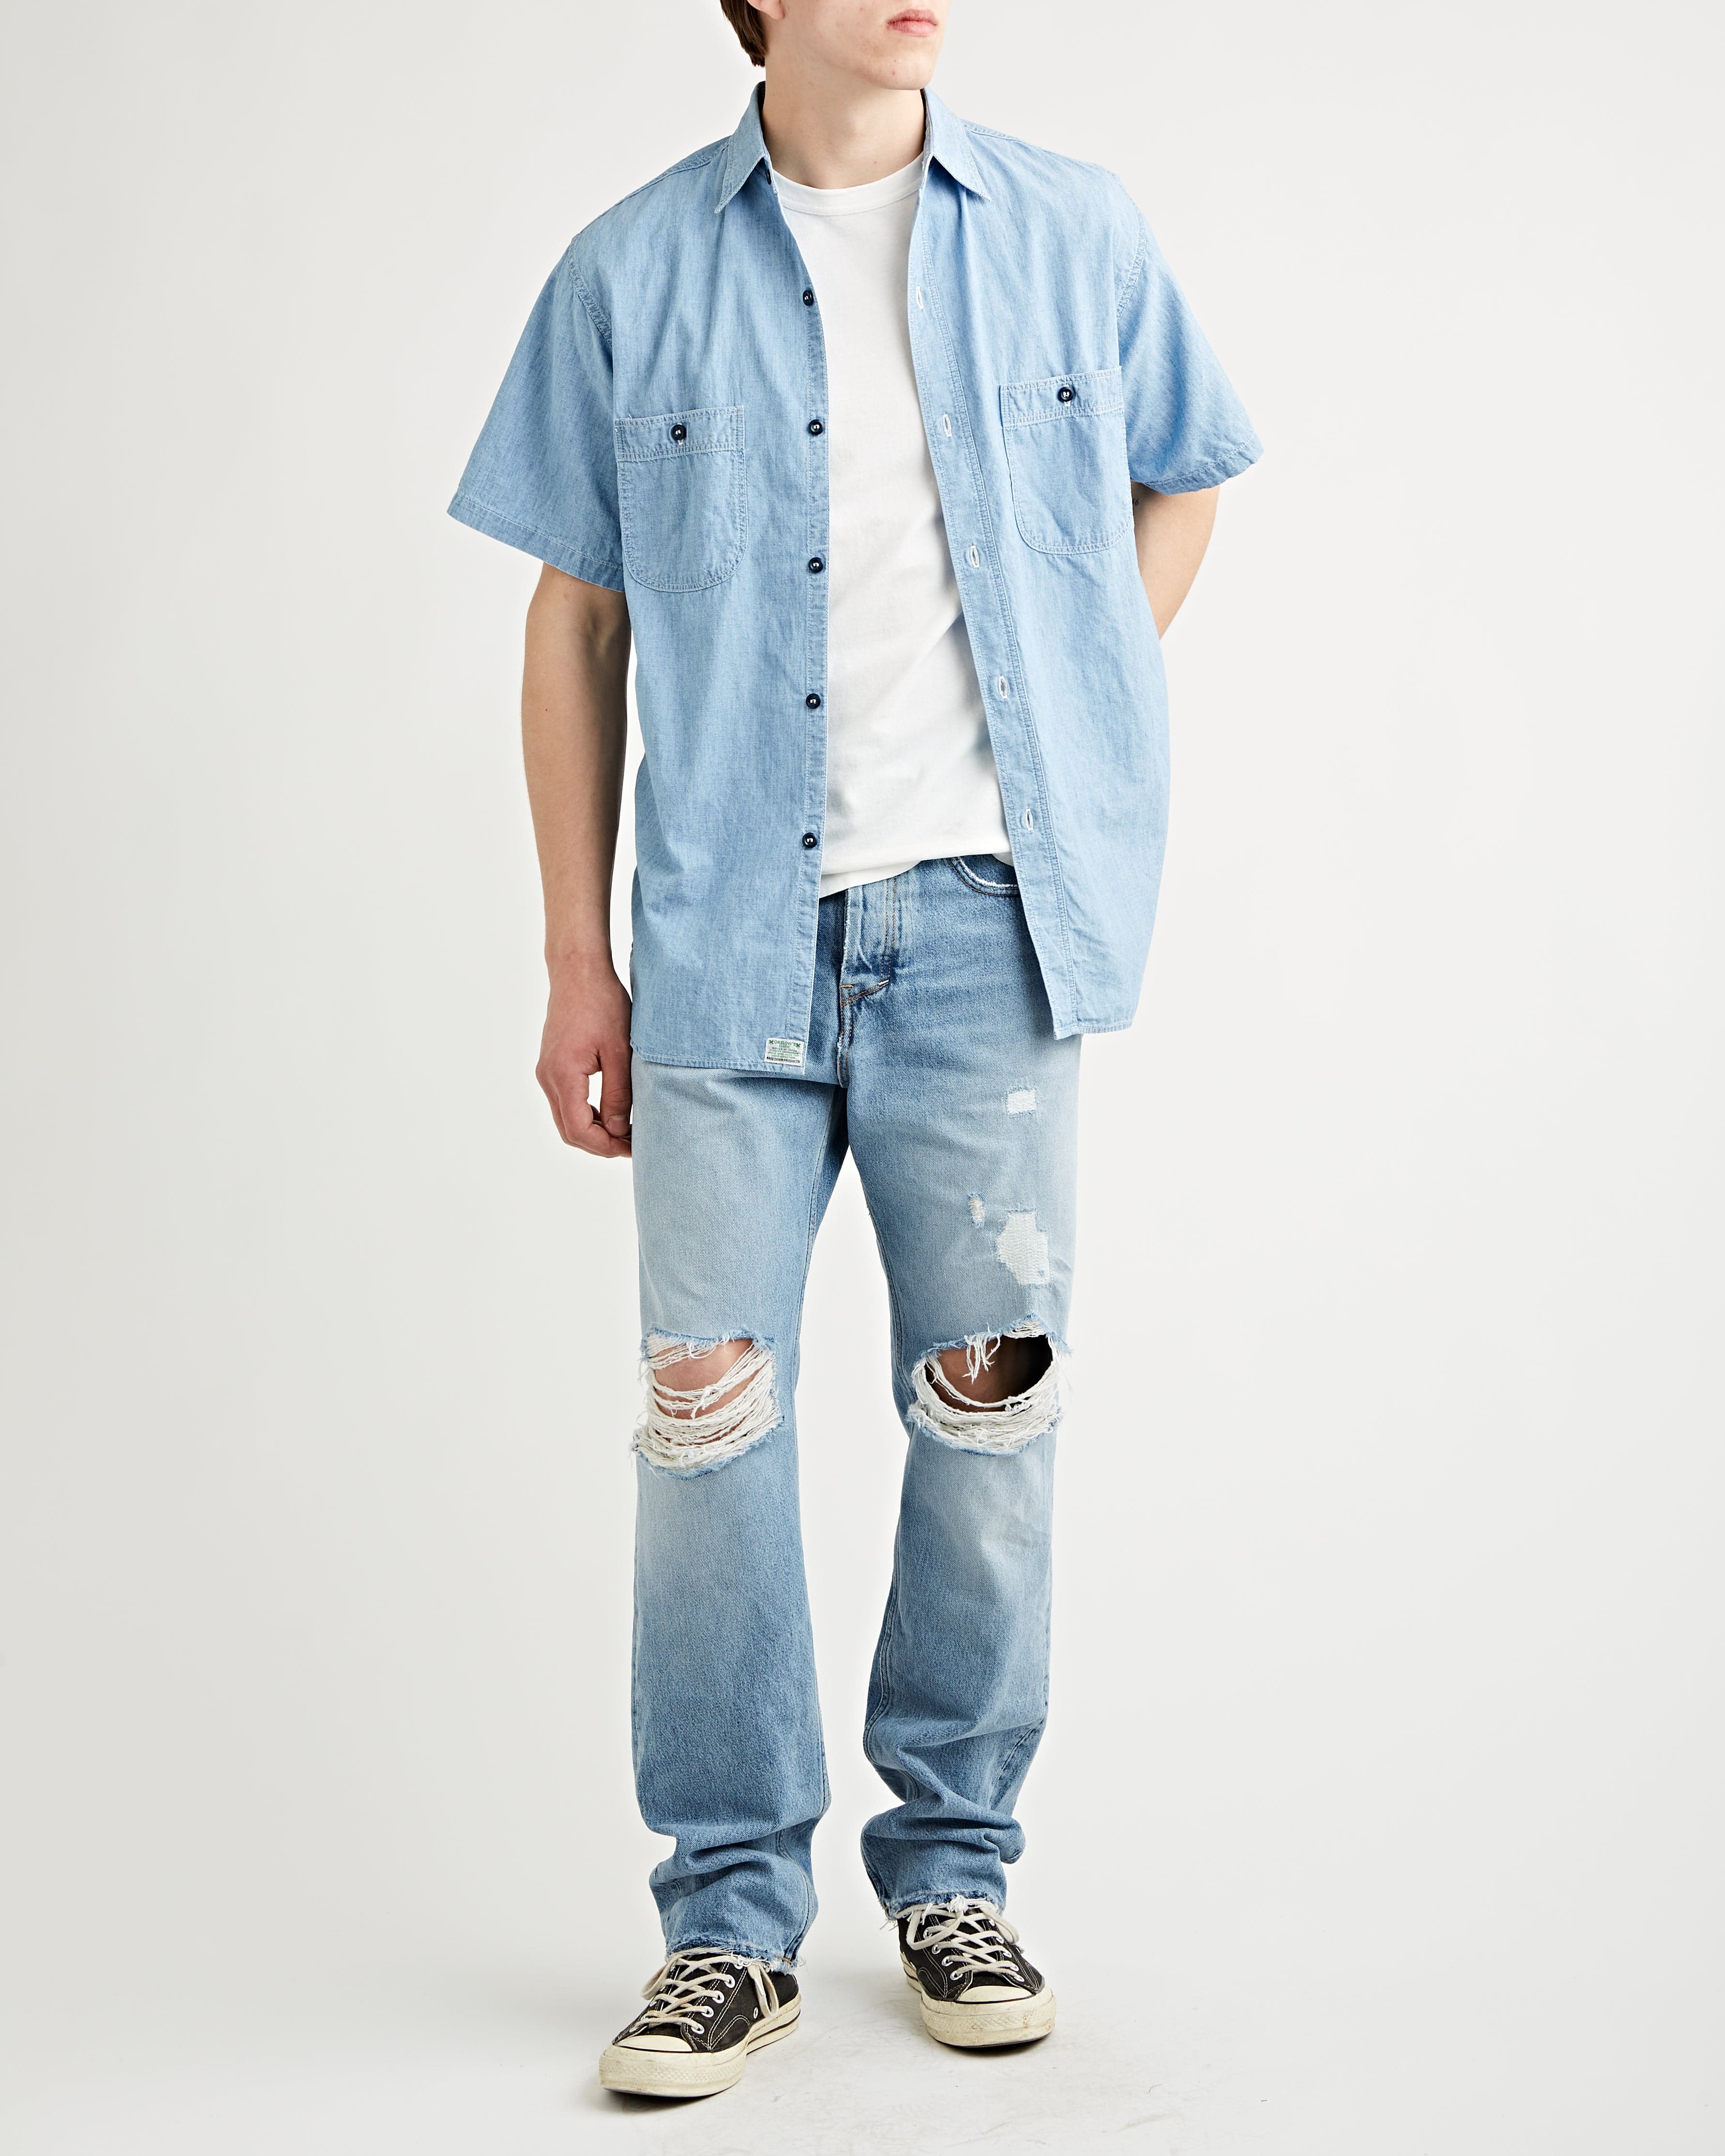 OrSlow Vintage Fit Work Shirt Chambray Bleach Shirt S/S Men